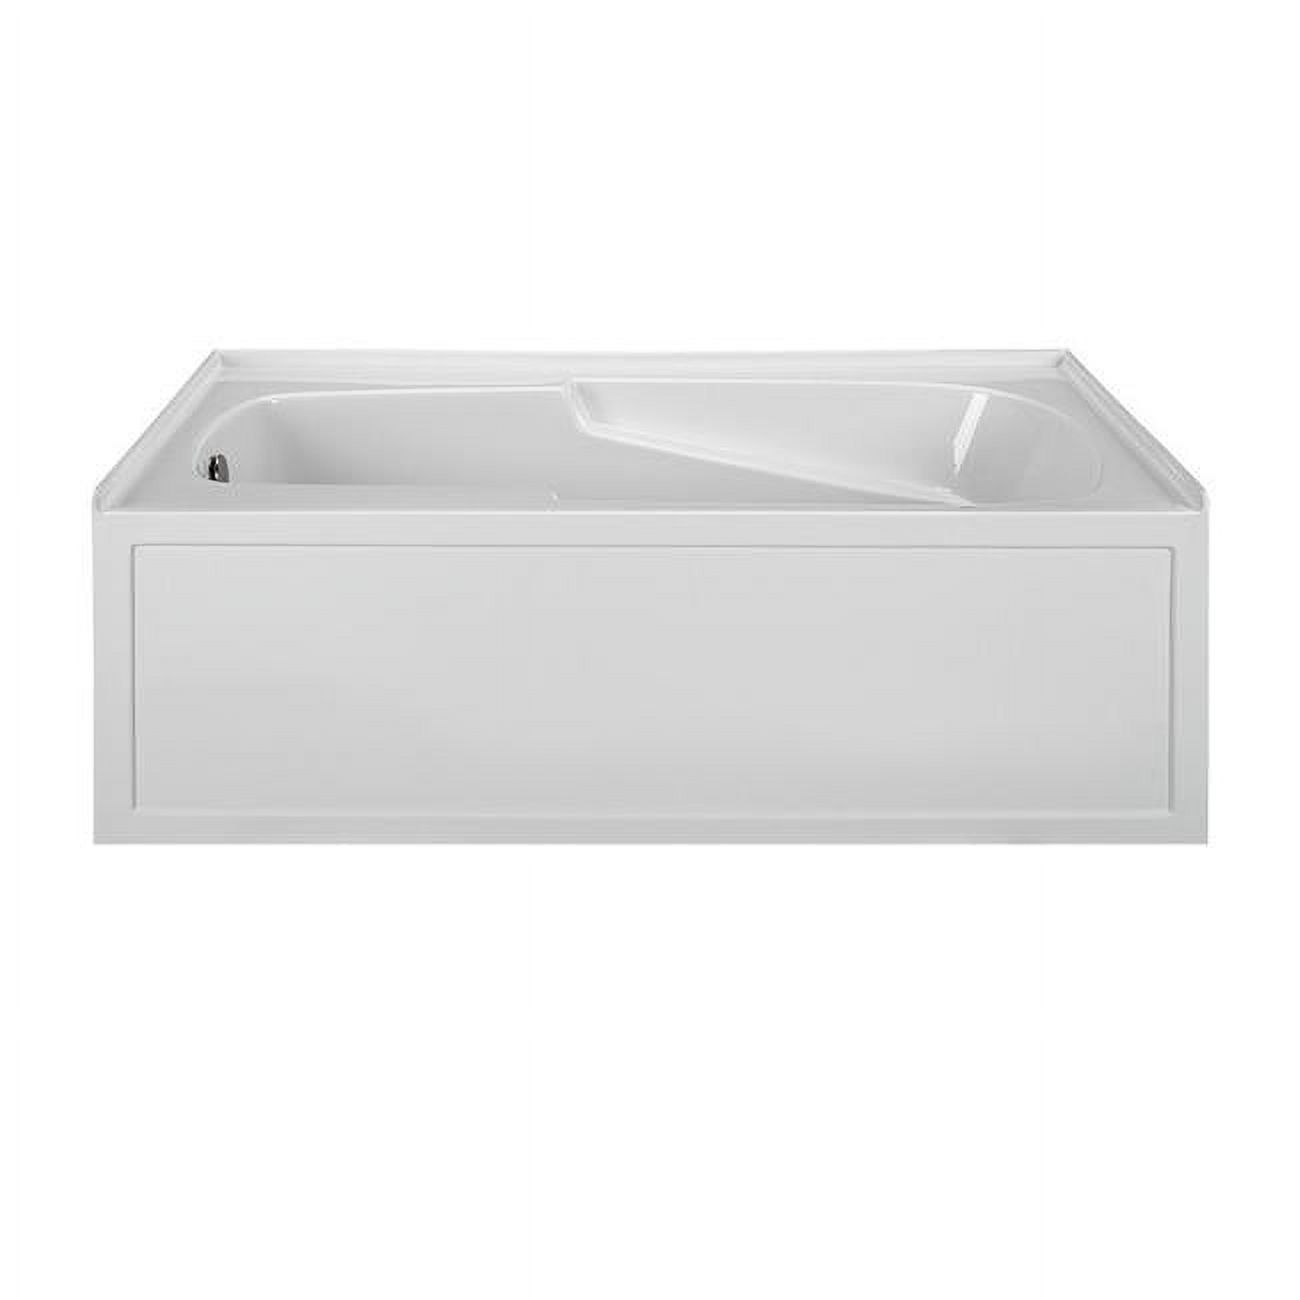 Integral Skirted End Drain Air Bath, Biscuit - 60 x 32 x 19.25 in. - image 1 of 1